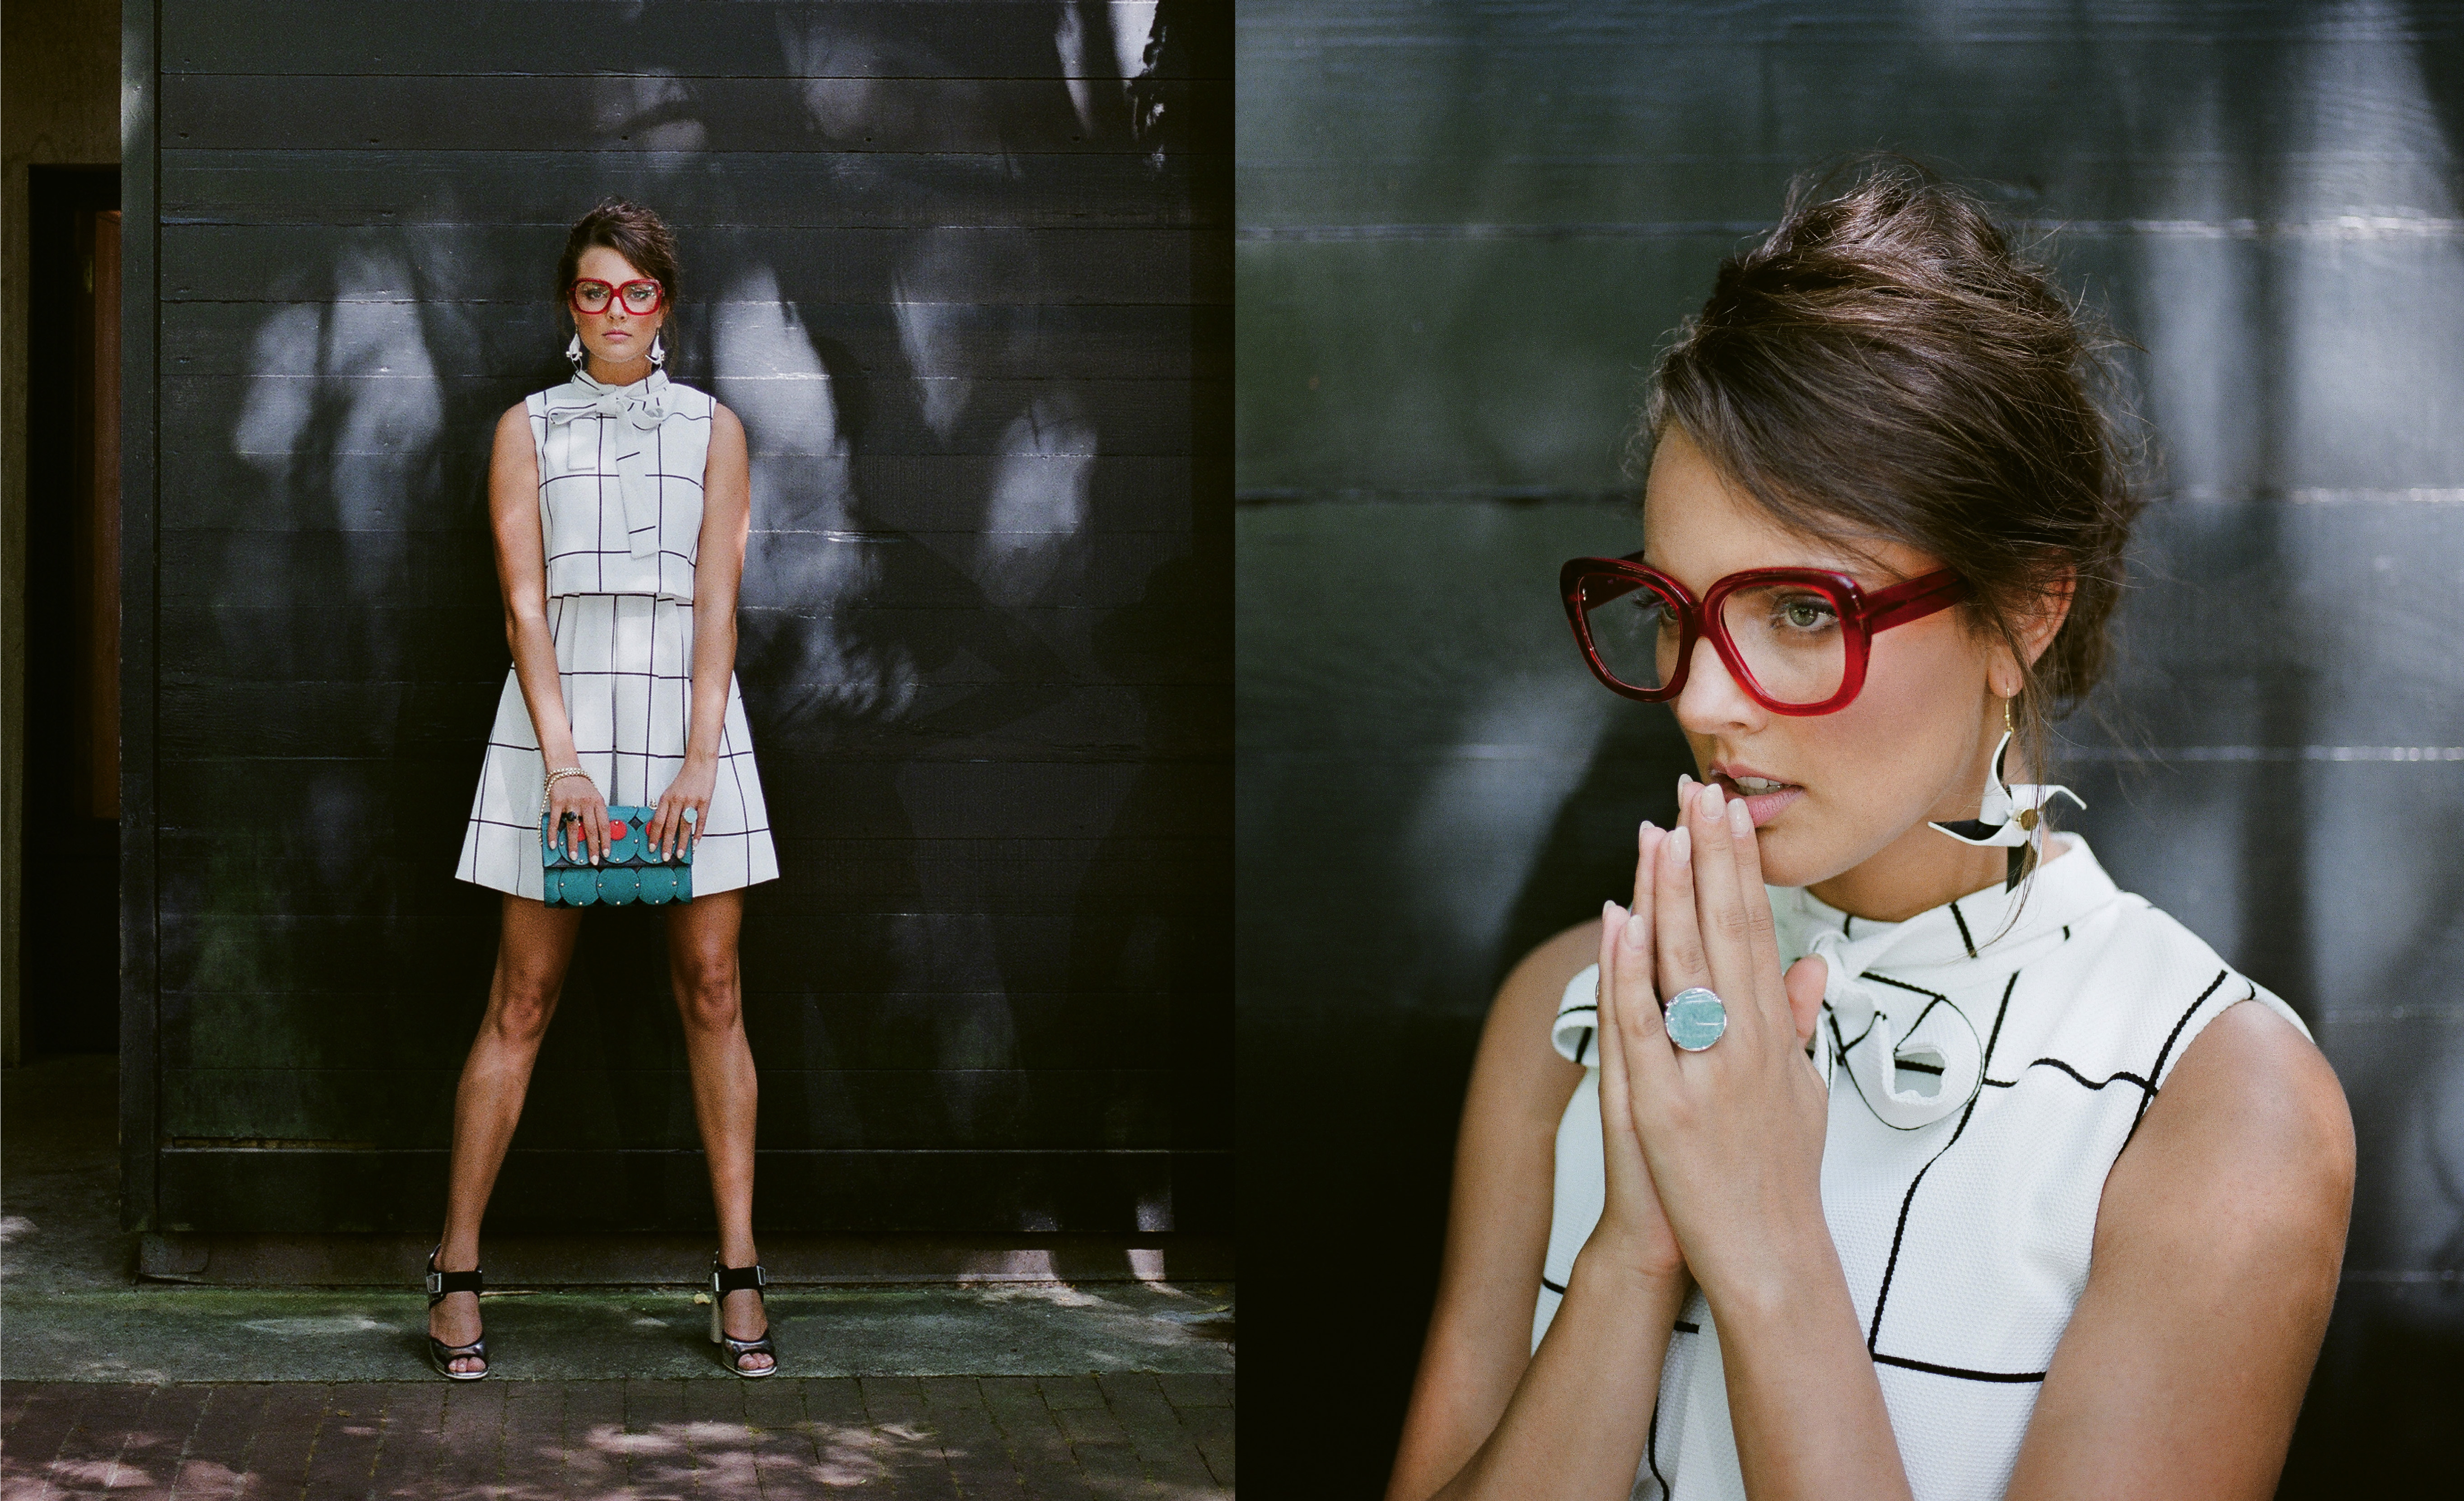 Square Space: Gracia belted windowpane print dress, $68 at Très Carmen; Ellia Wang turquoise pillow clutch, $594 at Maris Dehart; sterling-silver ring with black onyx, $60 at Gold Creations; and Marni silver block heel, $970 at Hampden Clothing. (Opposite) “Caroline“ glasses in “cherry red,“ $465 at Friedrich’s Optik; Ellia Wang Geometry Collection pinwheel earrings, $78 at Maris Dehart; and 14K white-gold ring with amazonite crystal and diamonds, $1,575 at Gold Creations